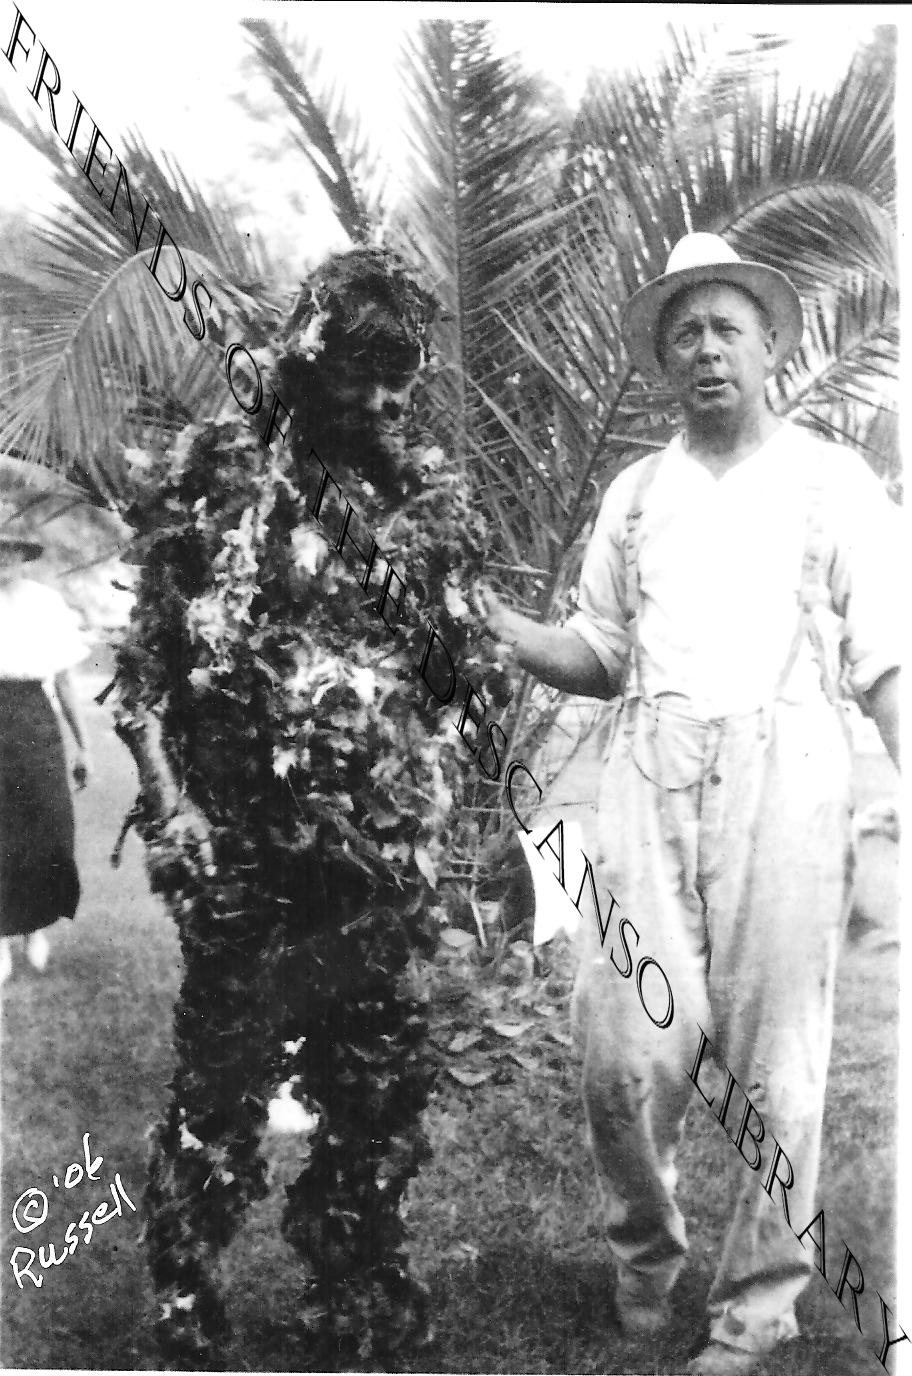 man tarred and feathered during ww1